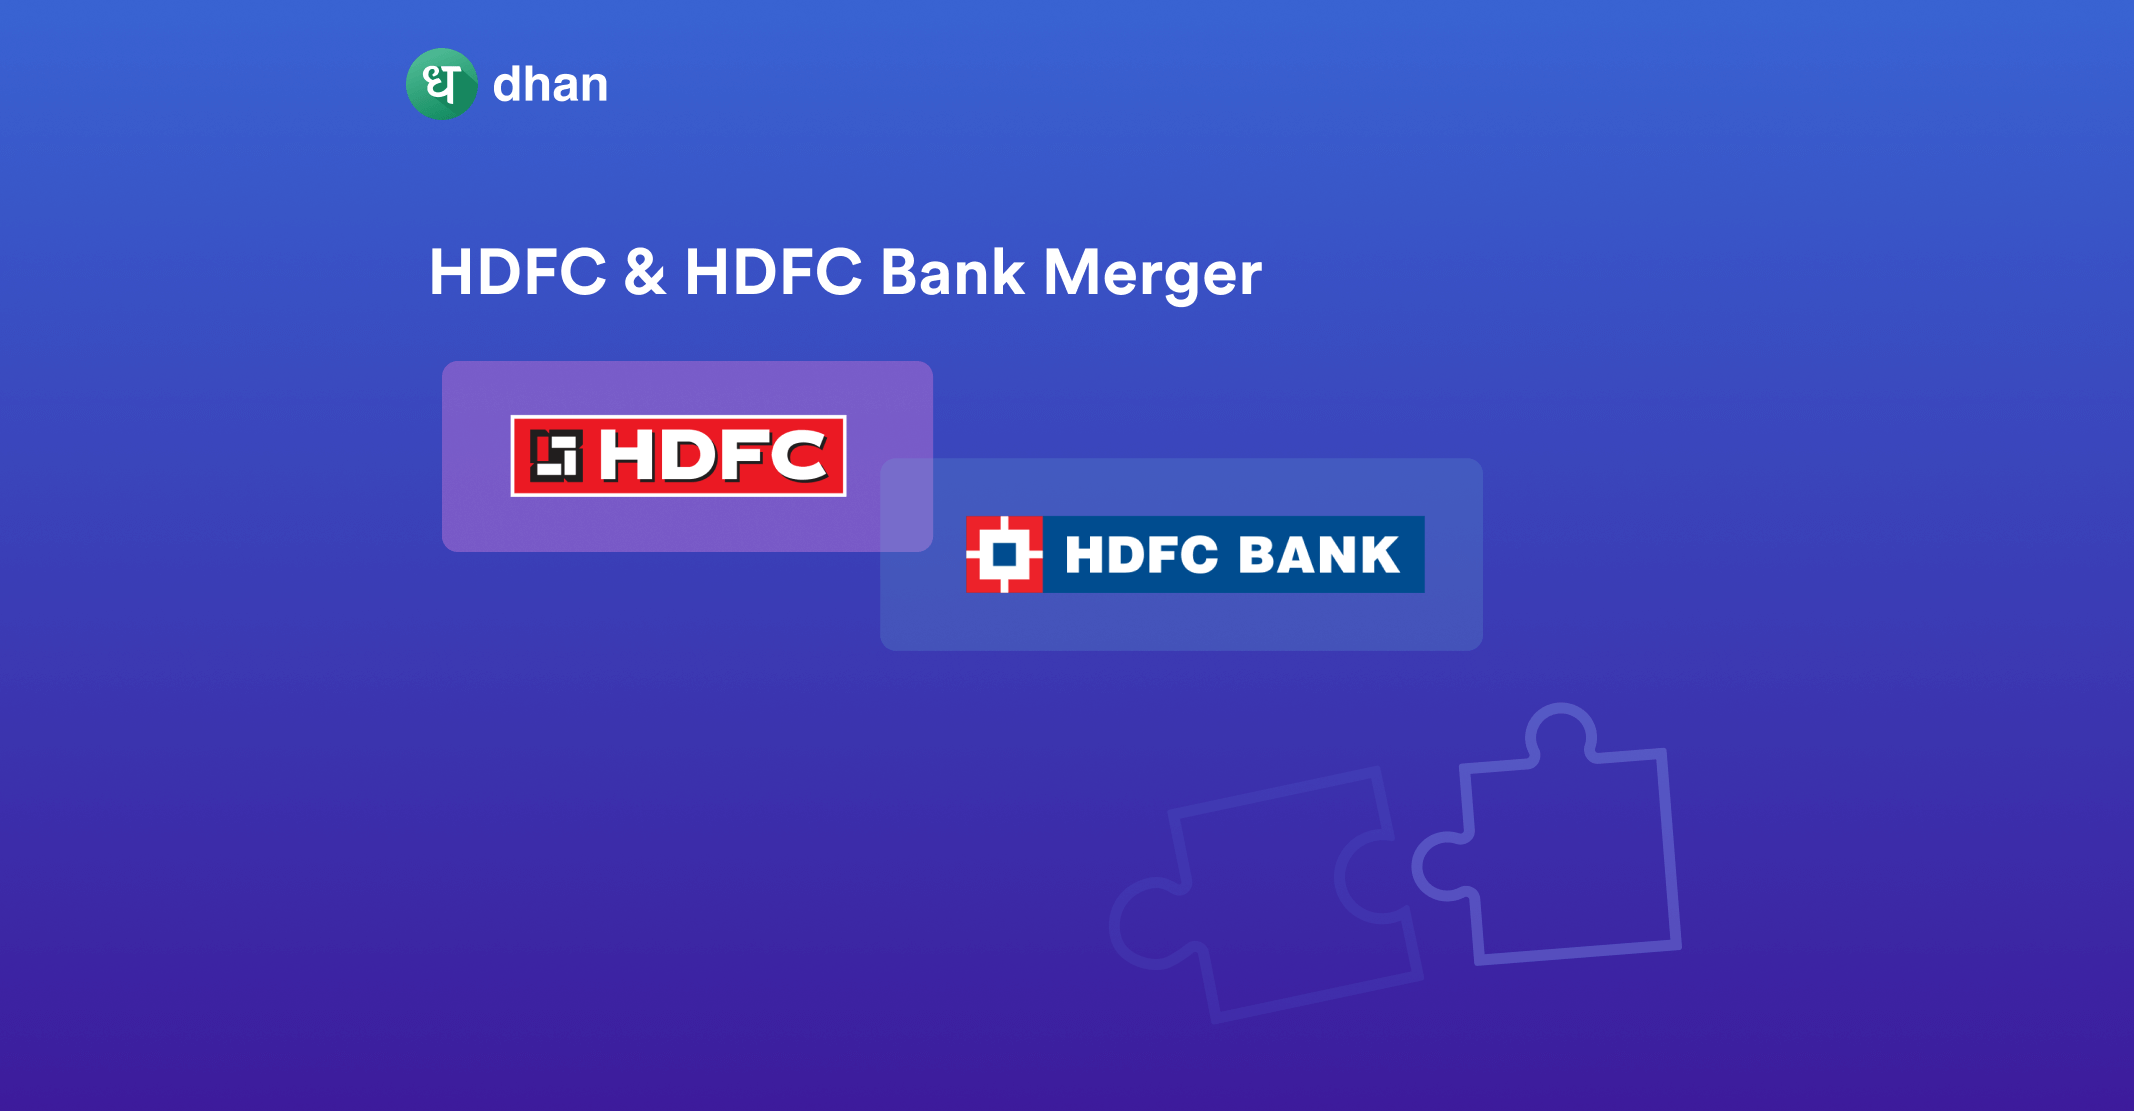 HDFC - HDFC Bank Merger - The Twins Merge